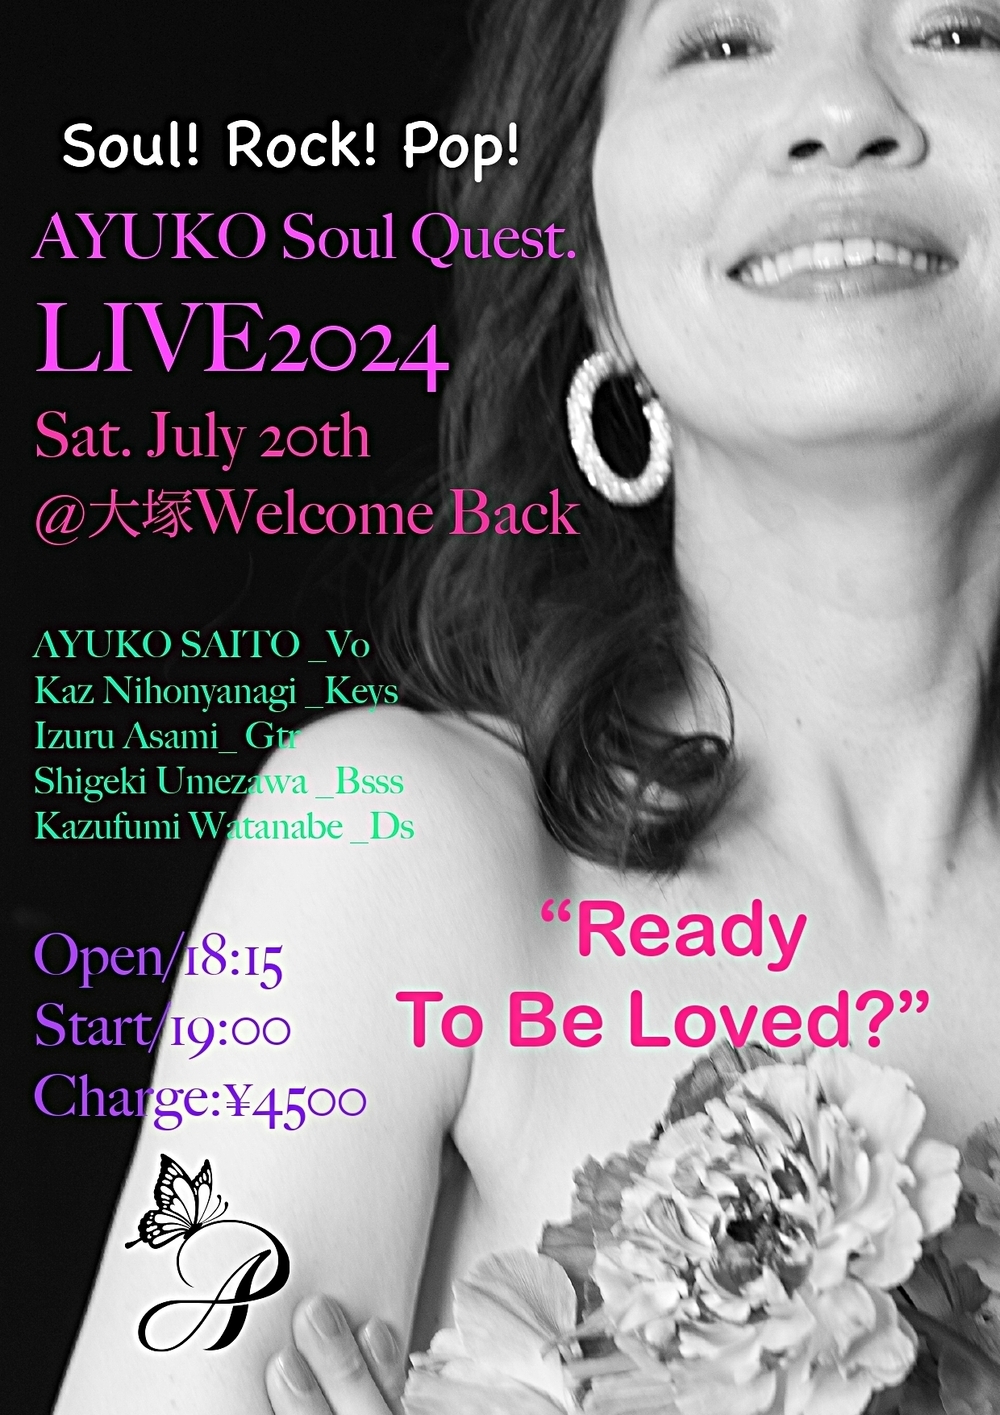 AYUKO Soul Quest. LIVE 2024 "Ready To Be Loved?"